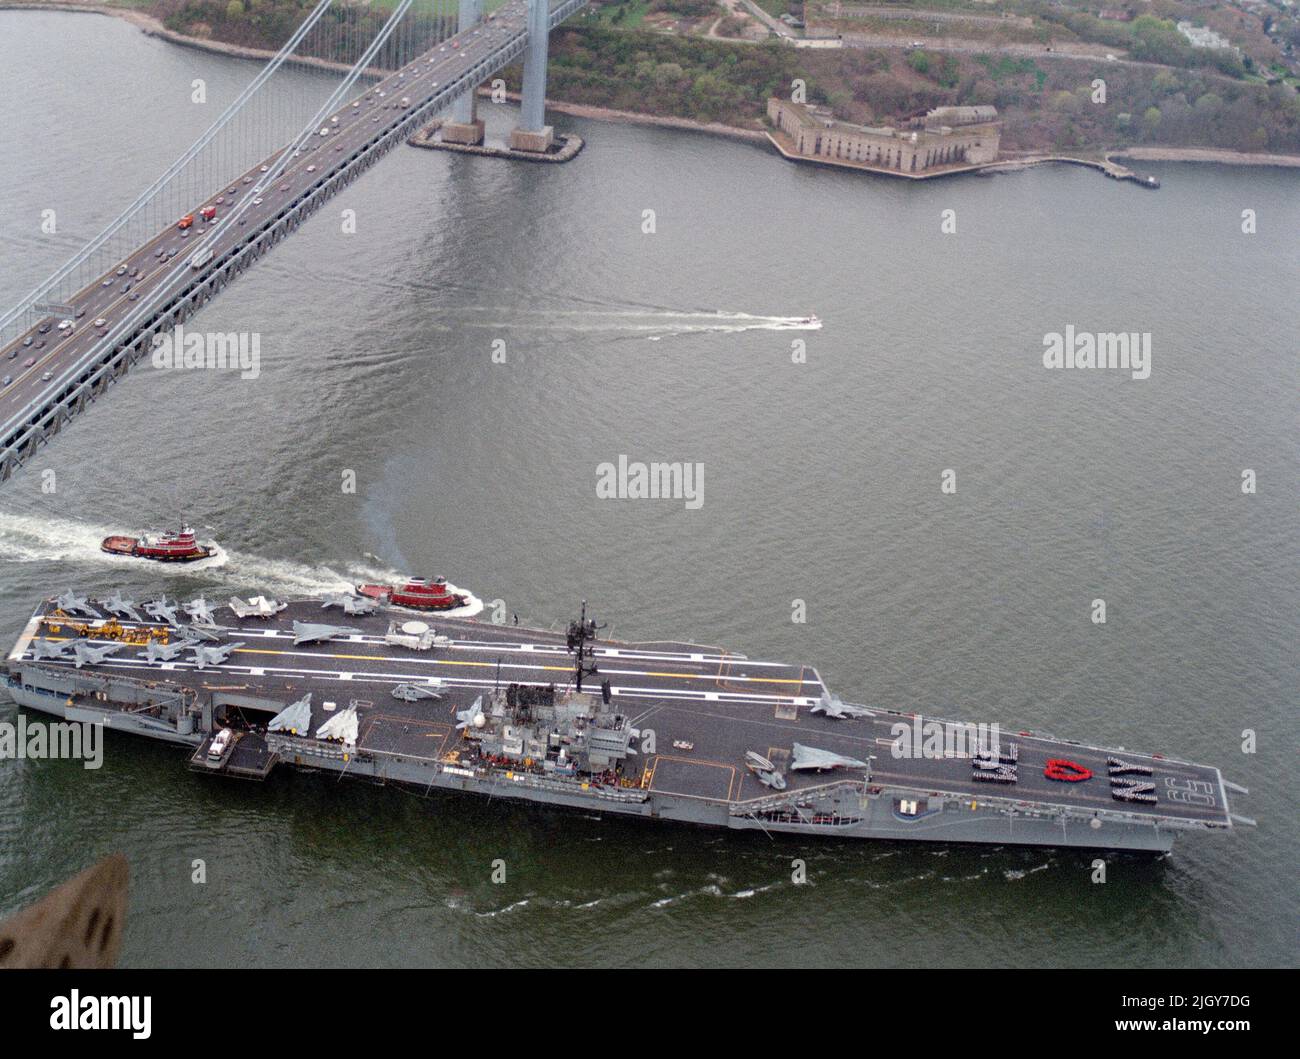 The aircraft carrier USS FORRESTAL (CV 59), escorted by a pair of tug boats, passes under the Verrazano Narrows Bridge as it approaches New York City. The FORRESTAL and its battle group as visiting the city for Fleet Week'89 Stock Photo